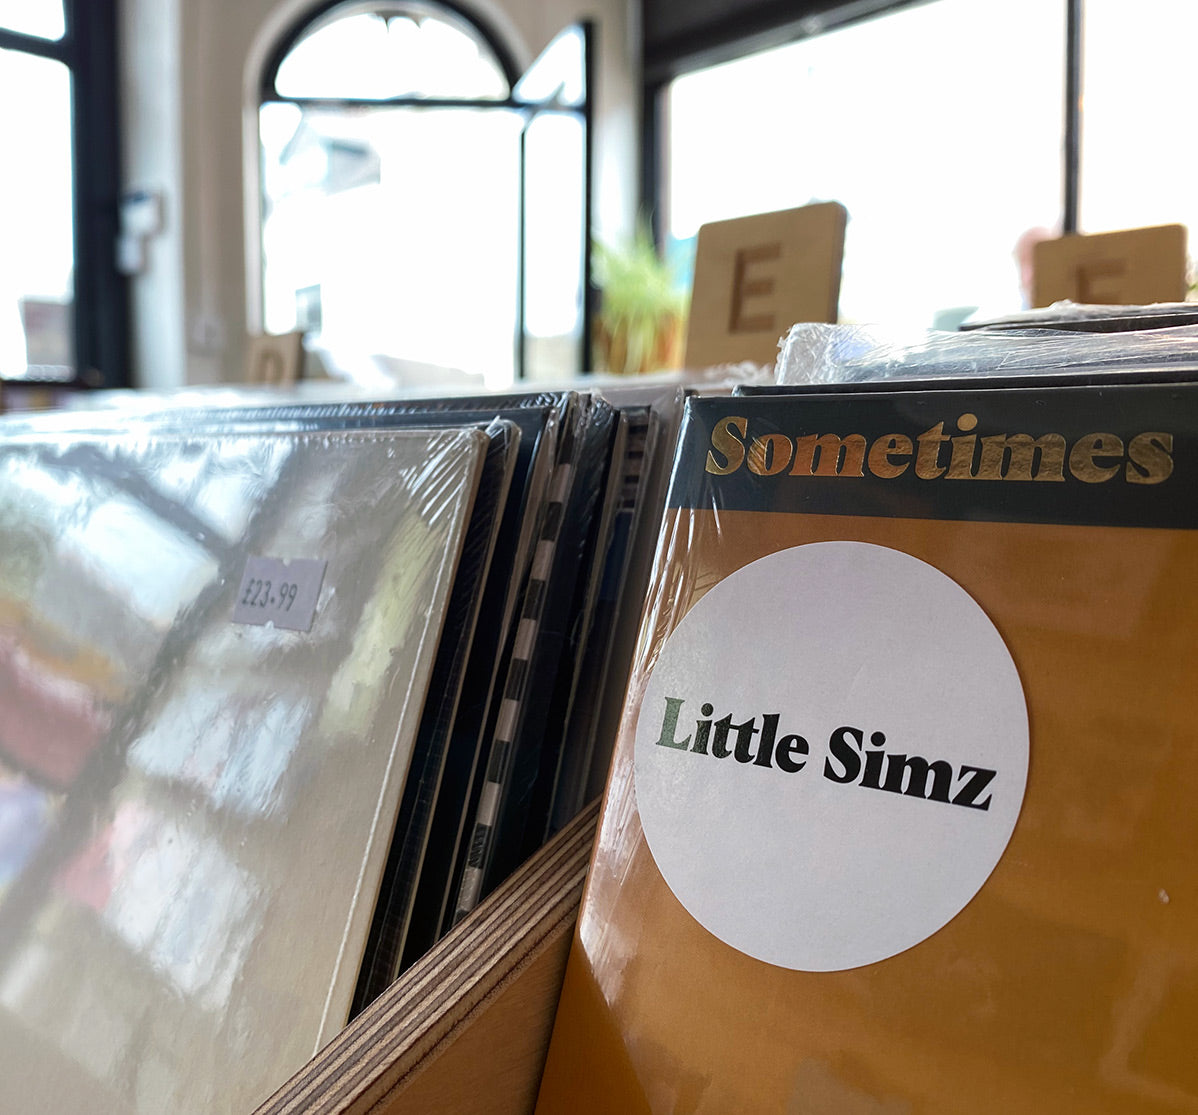 Records of the Week: Little Simz, Anna Phoebe, Molly Lewis, On Our Own Clock, BArTc, Nala Sinephro and DJ Seinfeld.